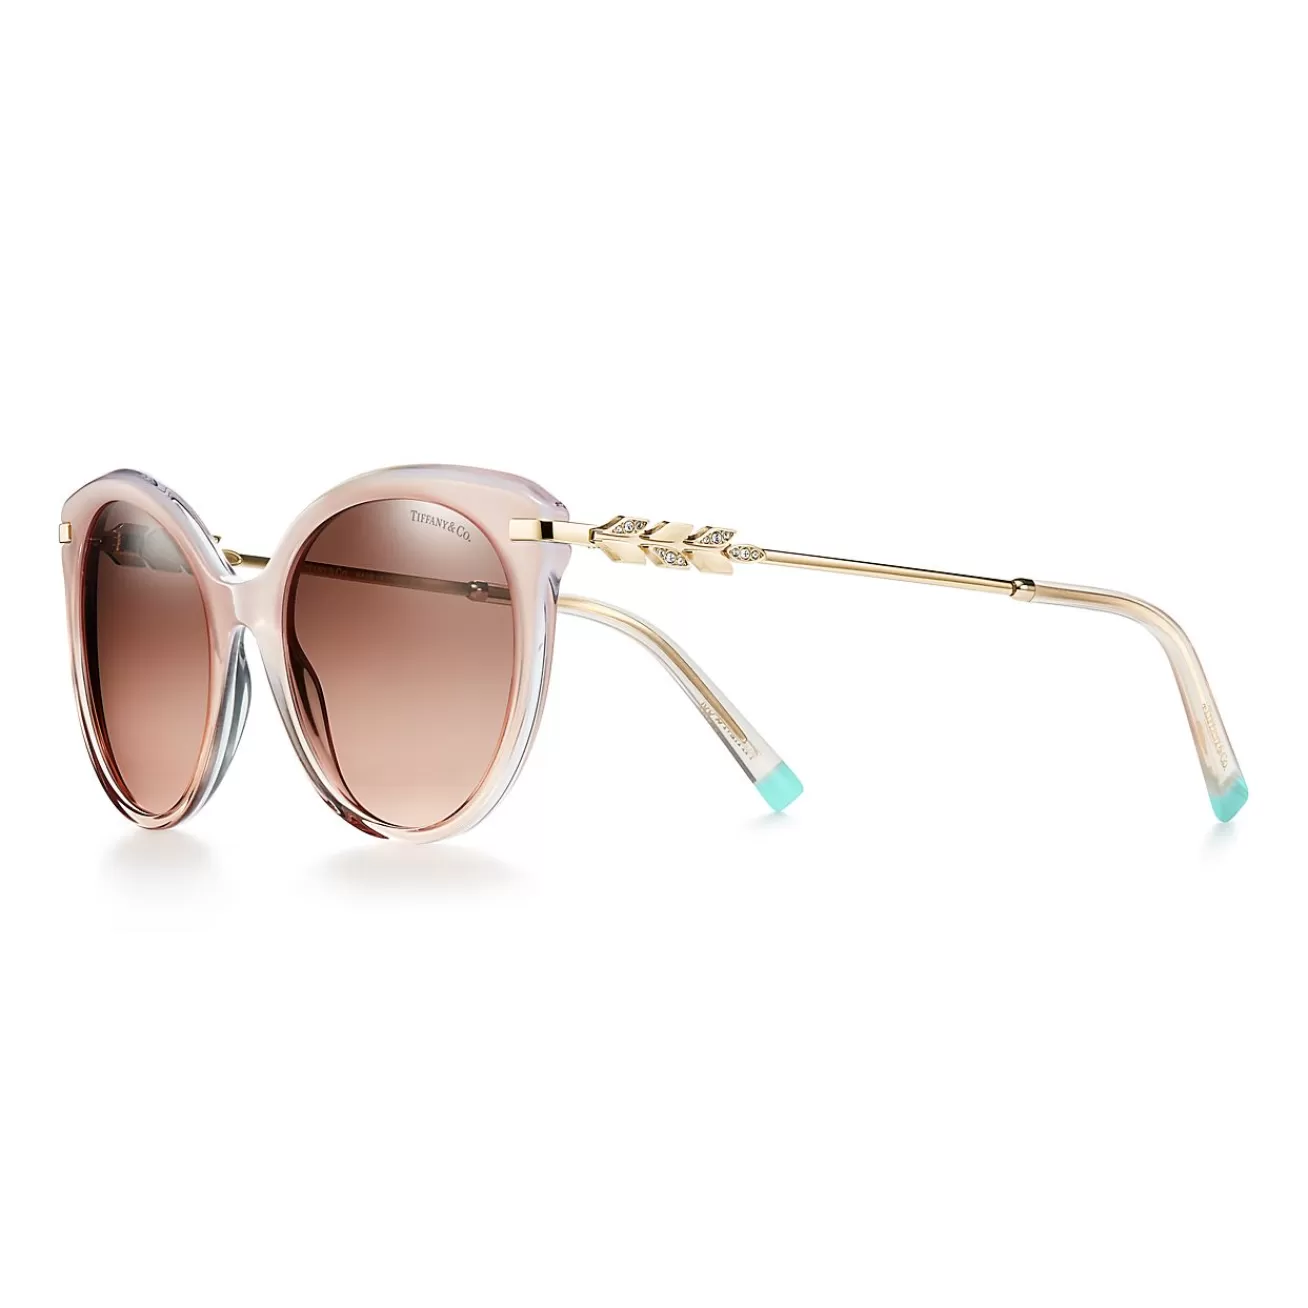 Tiffany & Co. Tiffany Victoria® Sunglasses in Pink Acetate with Gradient Pink and Brown Lenses | ^ Tiffany Victoria® | Sunglasses